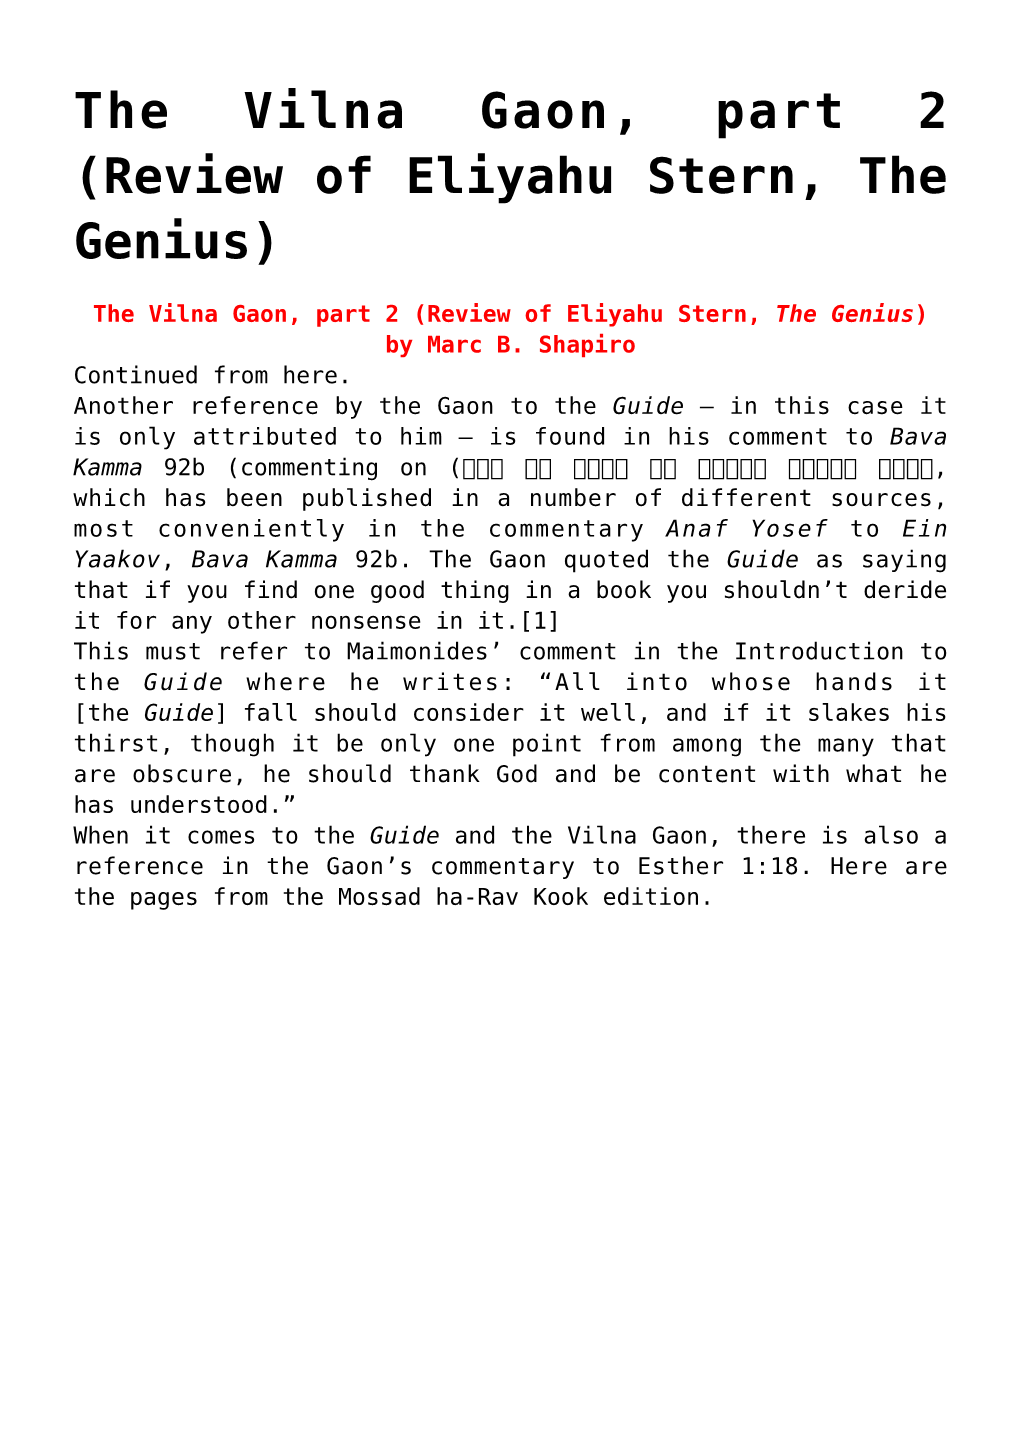 (Review of Eliyahu Stern, the Genius),The Vilna Gaon, Part 1